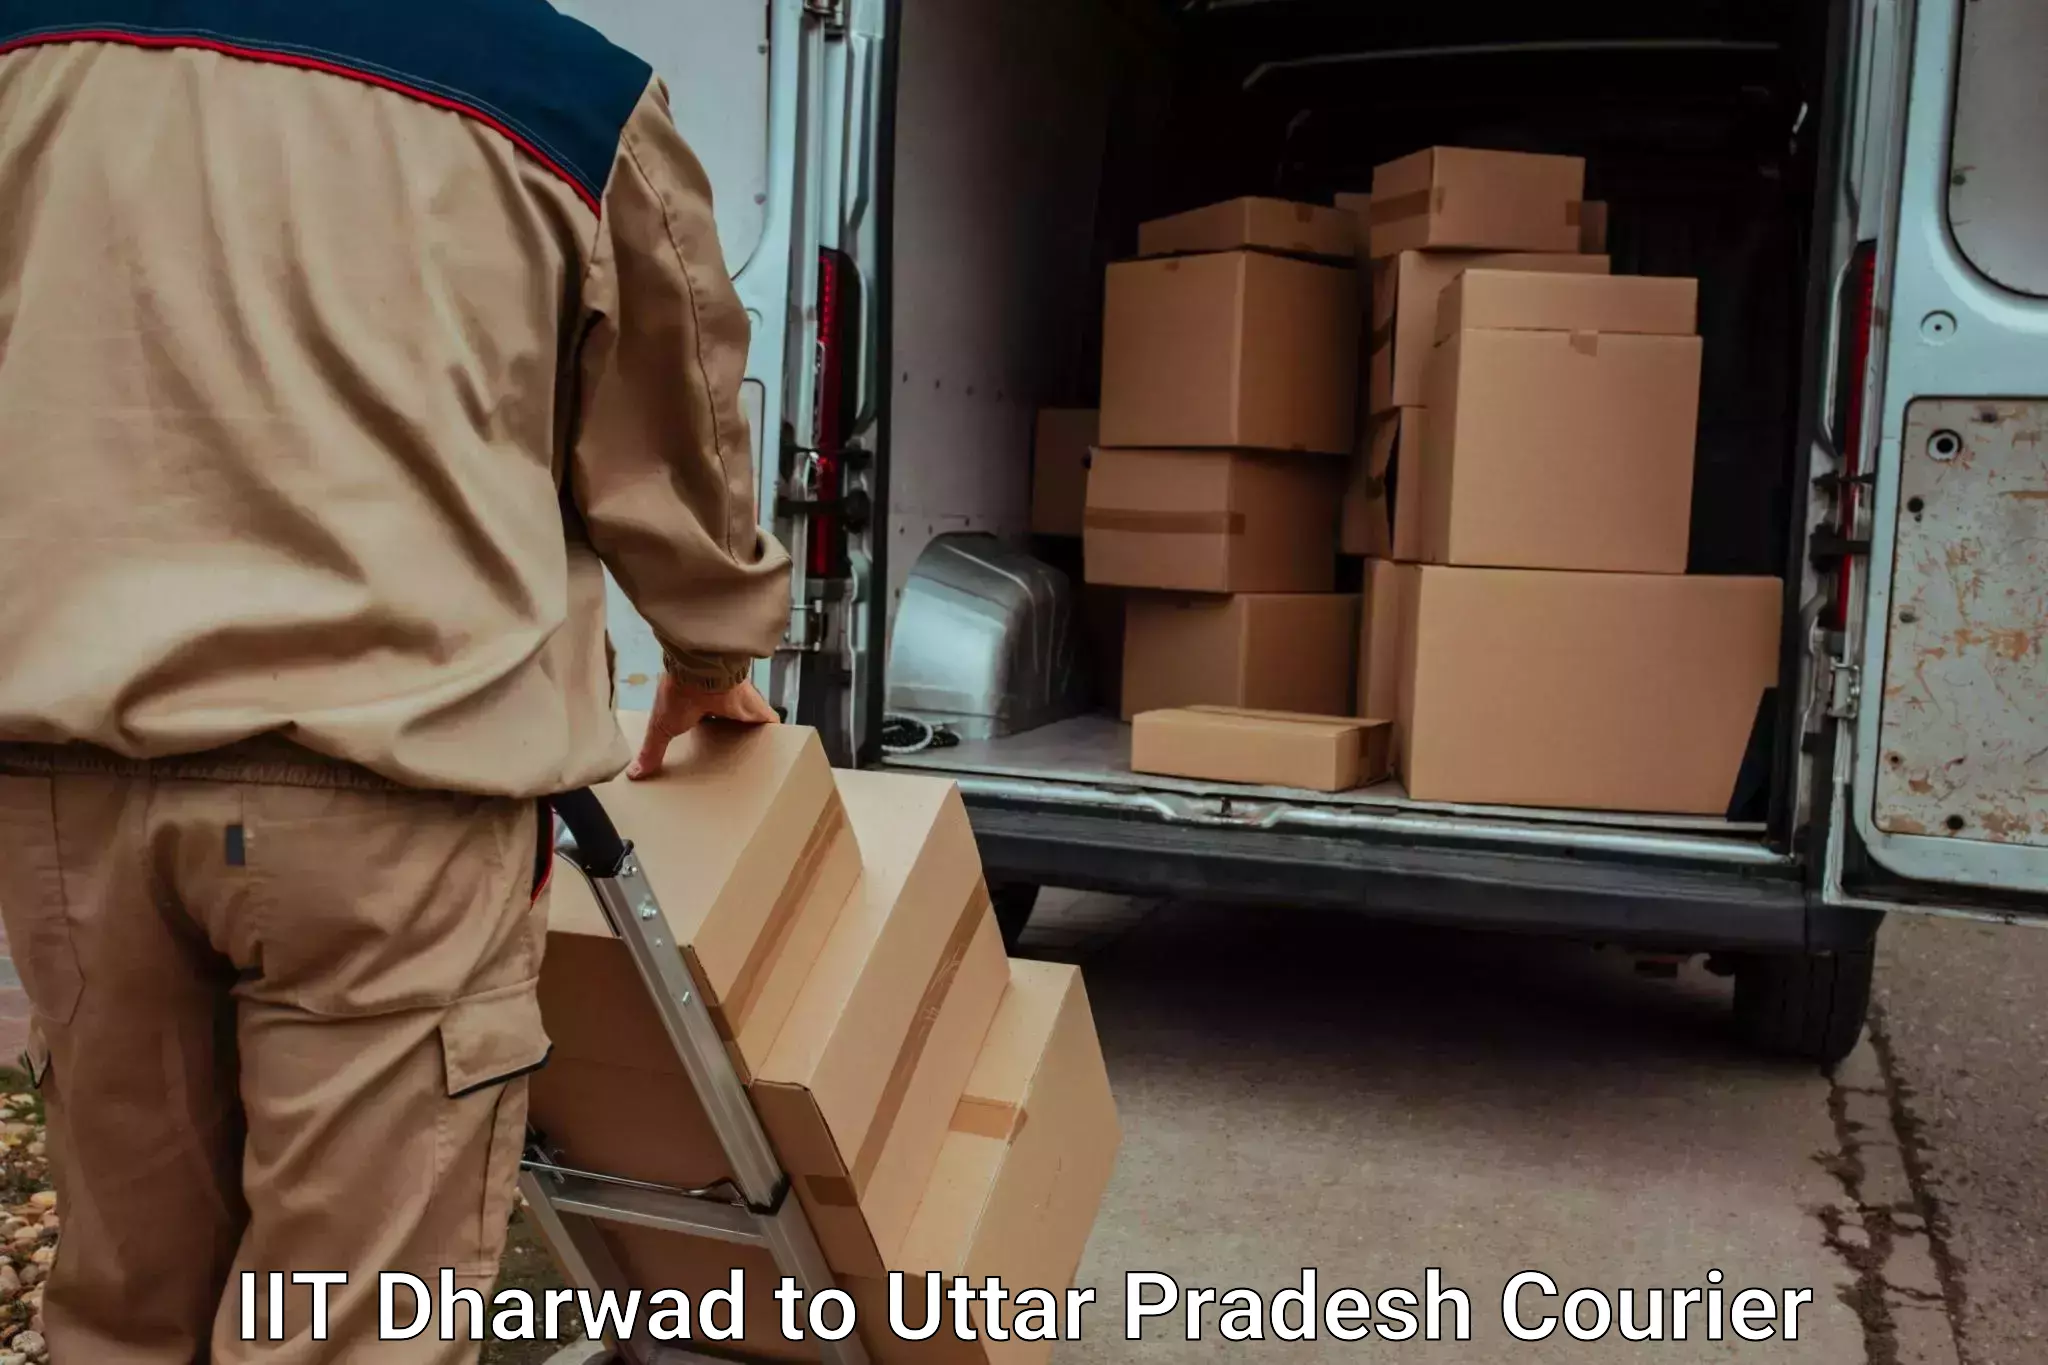 Baggage transport network IIT Dharwad to Kanth